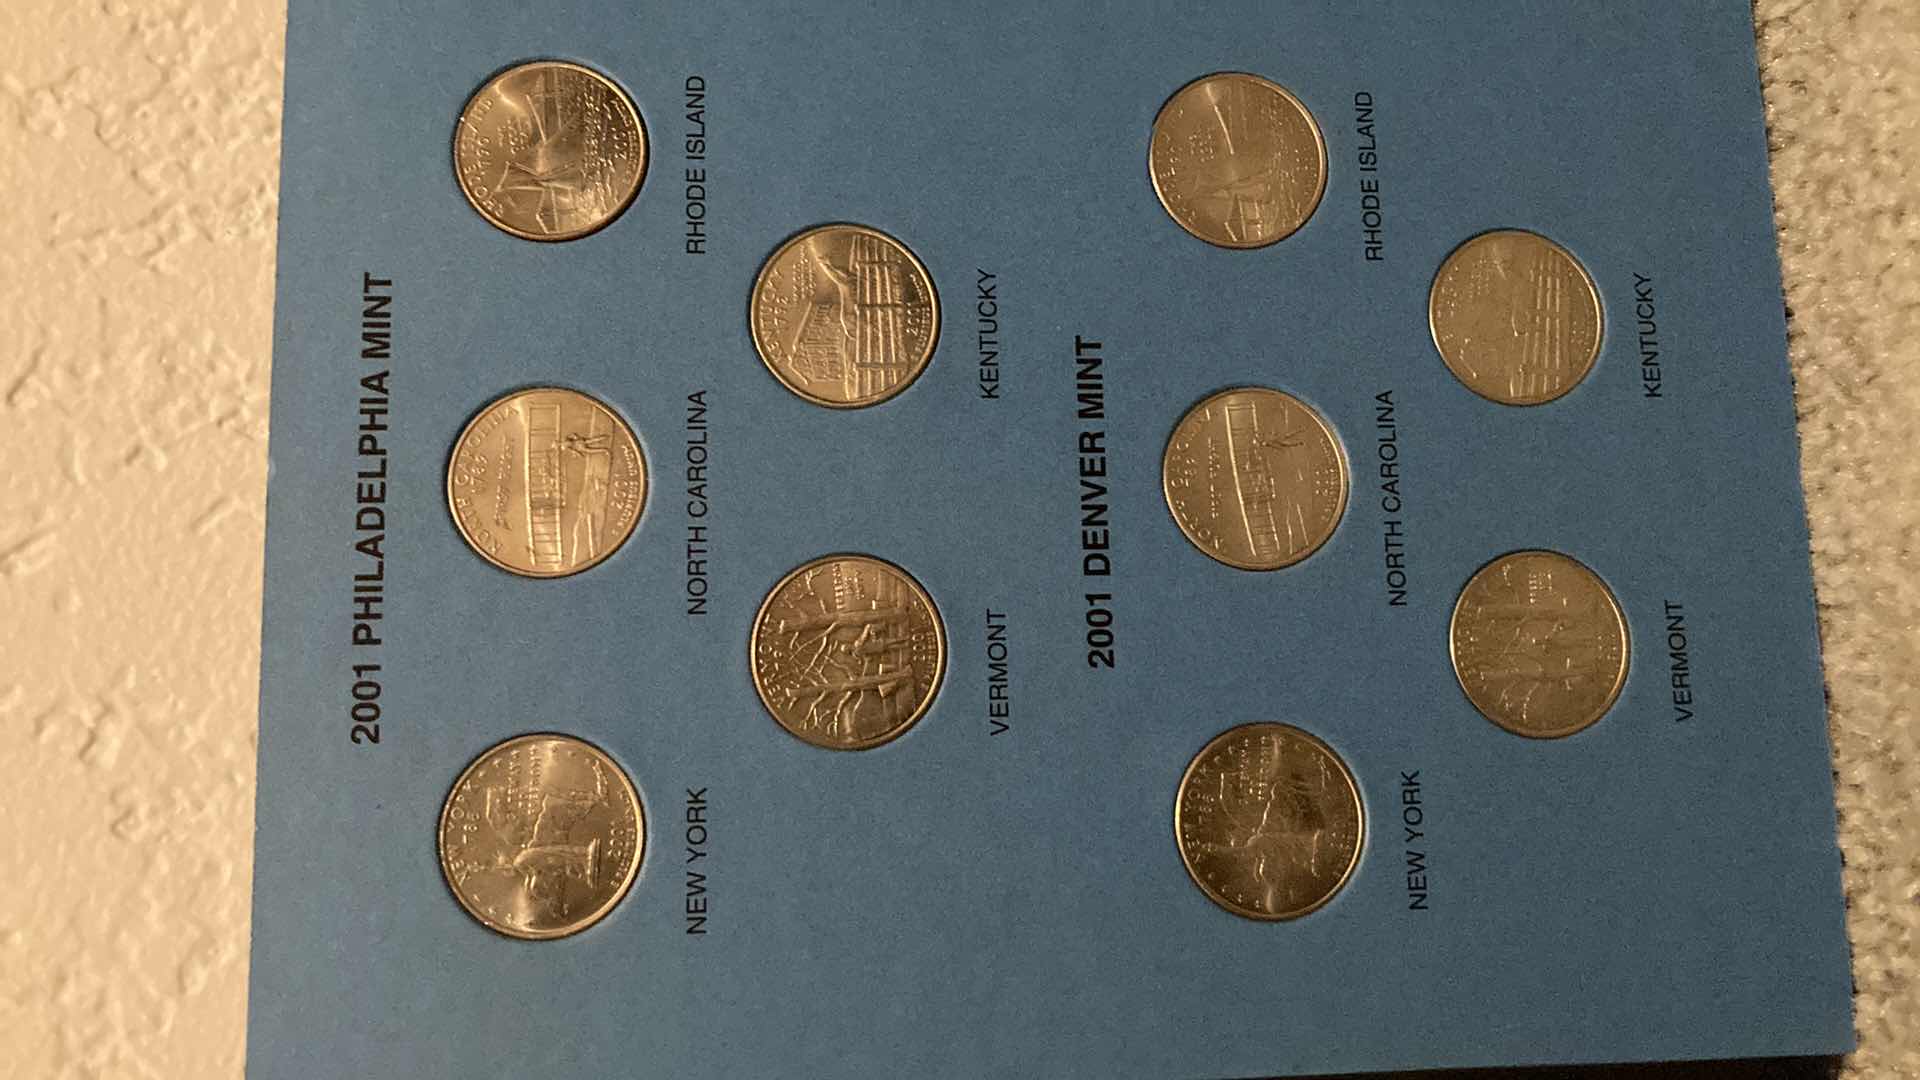 Photo 5 of OFFICIAL WHITMAN COIN FOLDER STATEHOOD QUARTERS COLLECTION 1999-2001 NO. 1 W COMPLETE COLLECTION OF QUARTERS